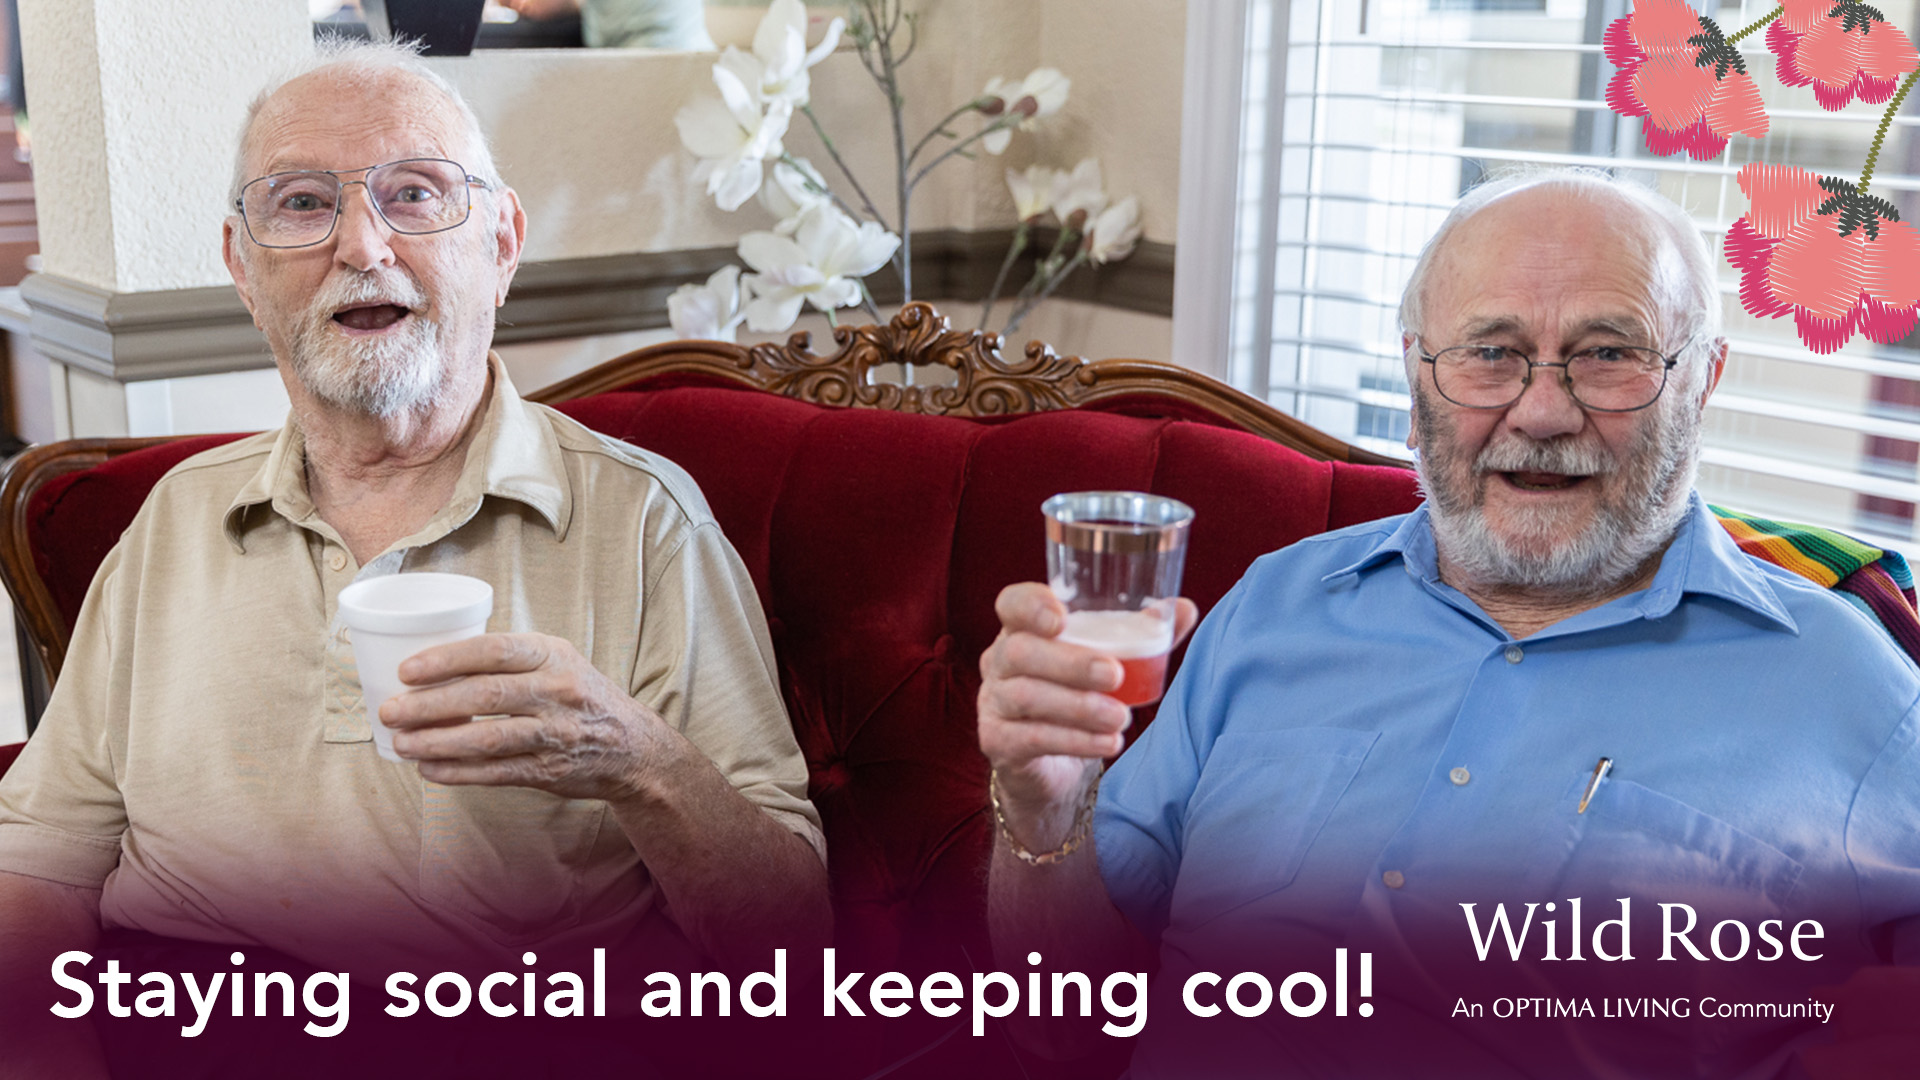 Two seniors sitting together enjoying some drinks and smiling.